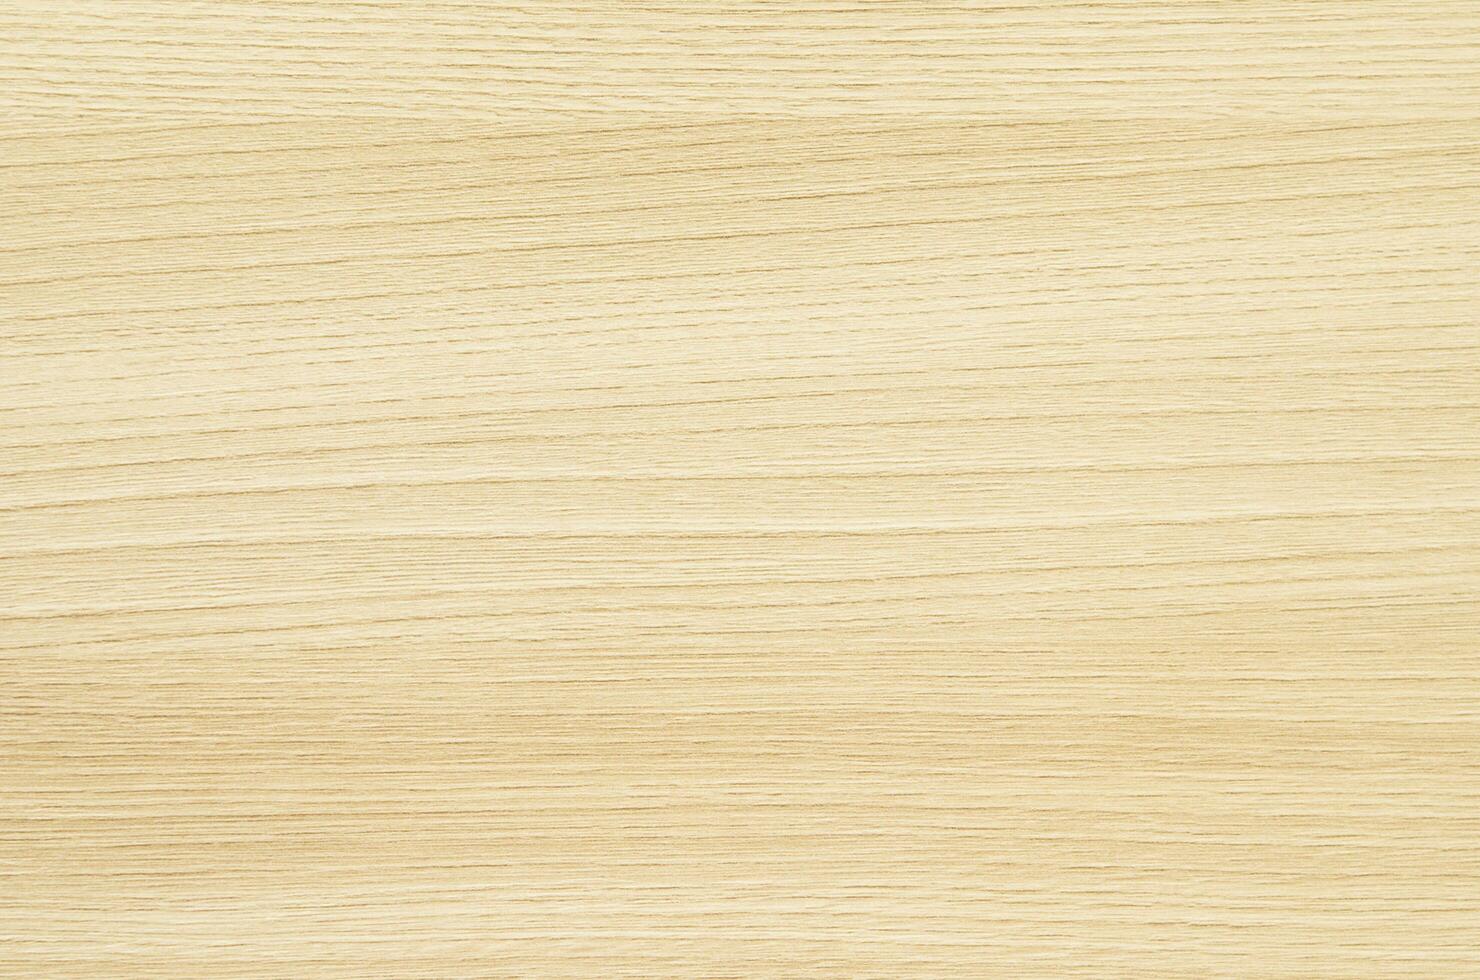 wood texture with natural patterns photo